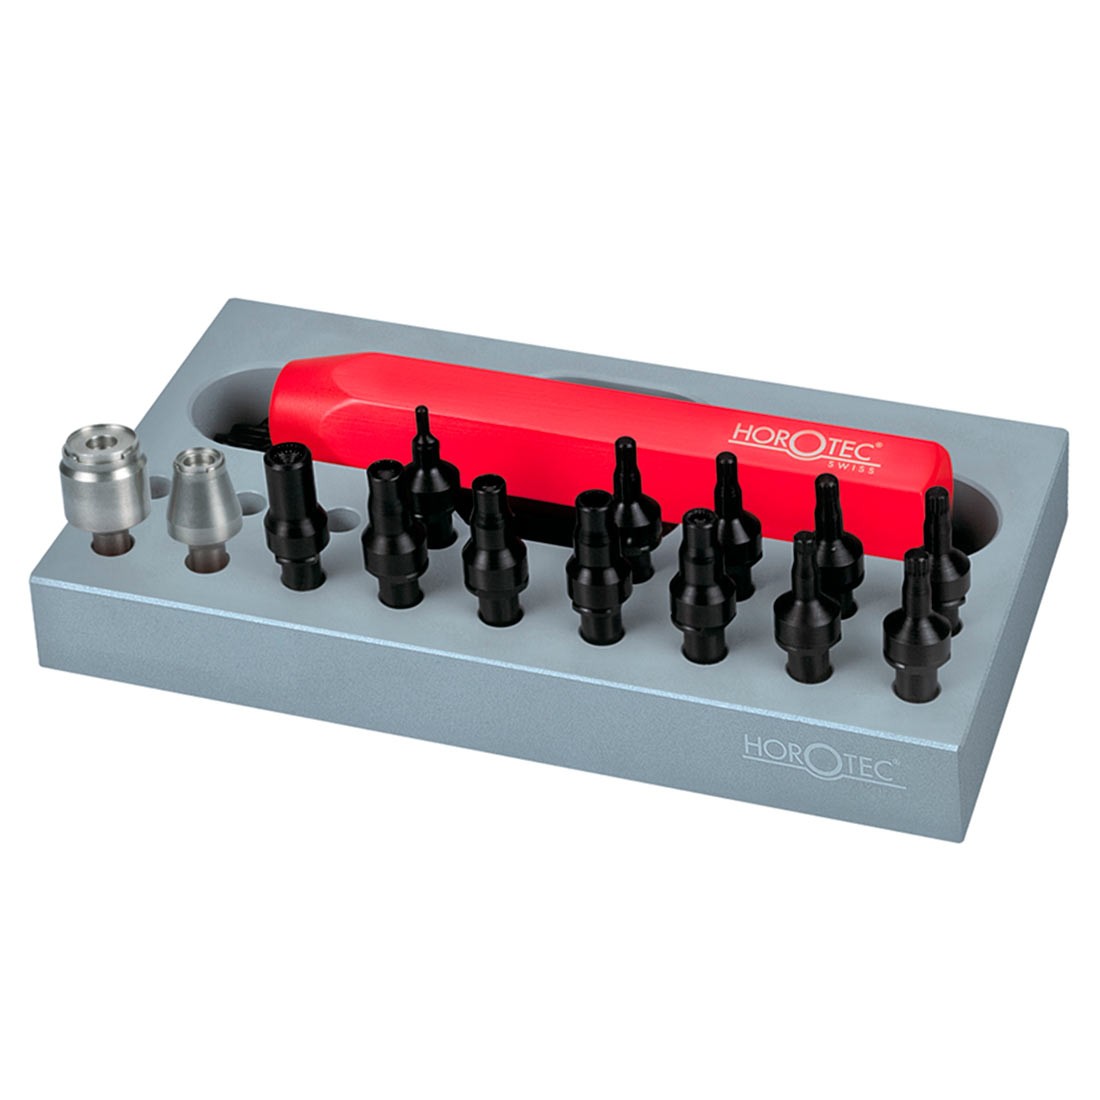 Horotec Tool for Assembling and Disassembling Screw-On Pushers, Tubes, and Oscillating Weight Bolts